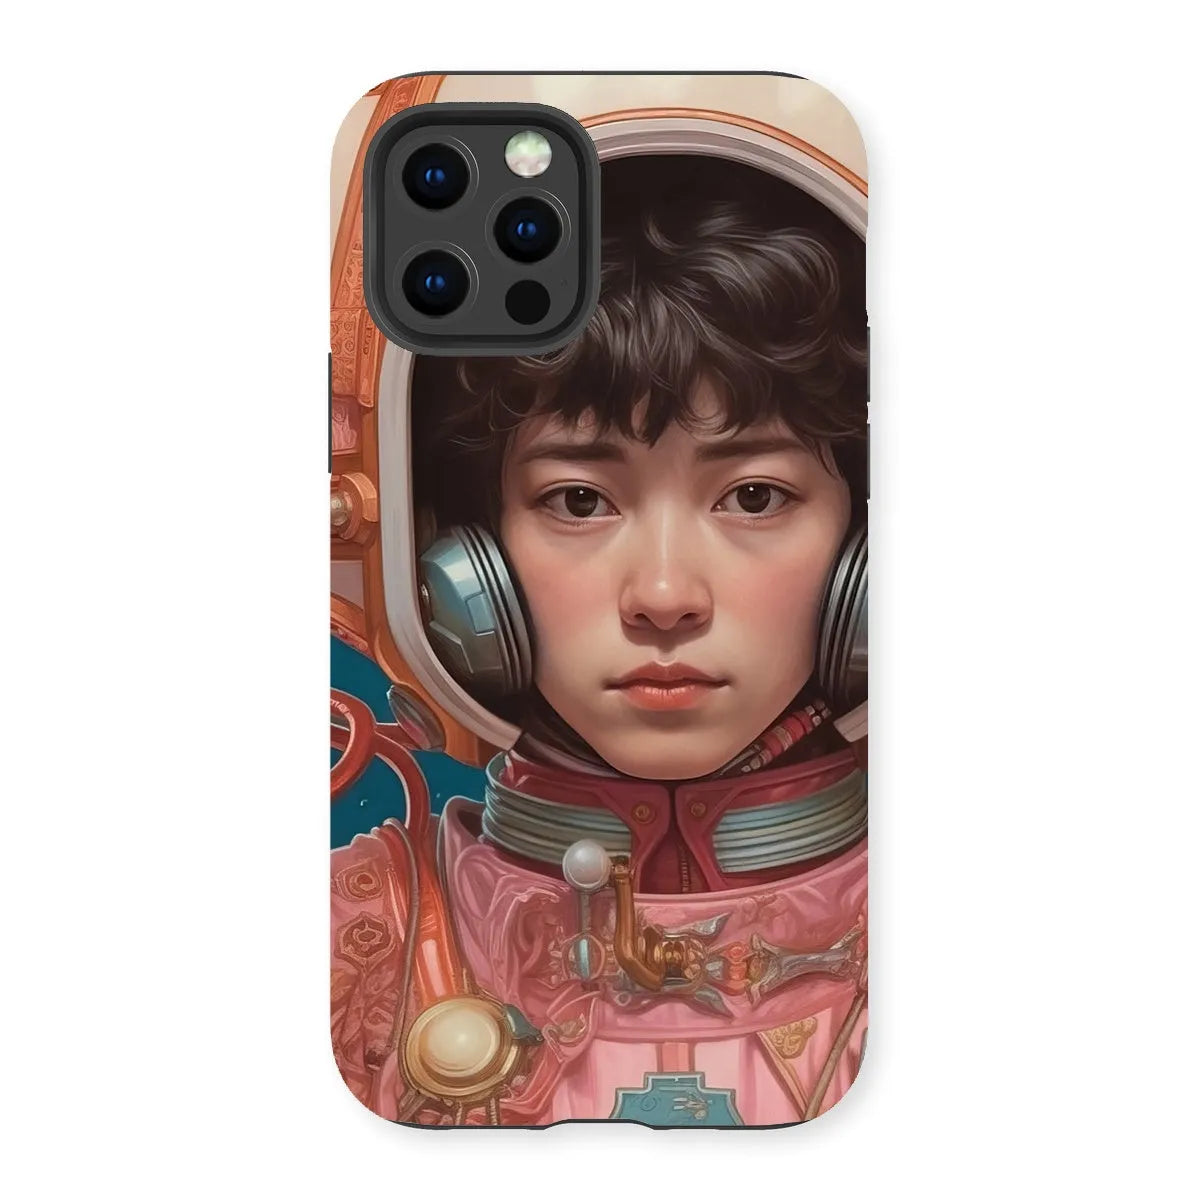 Kaito The Gay Astronaut - Lgbtq Art Phone Case - Iphone 13 Pro / Matte - Mobile Phone Cases - Aesthetic Art